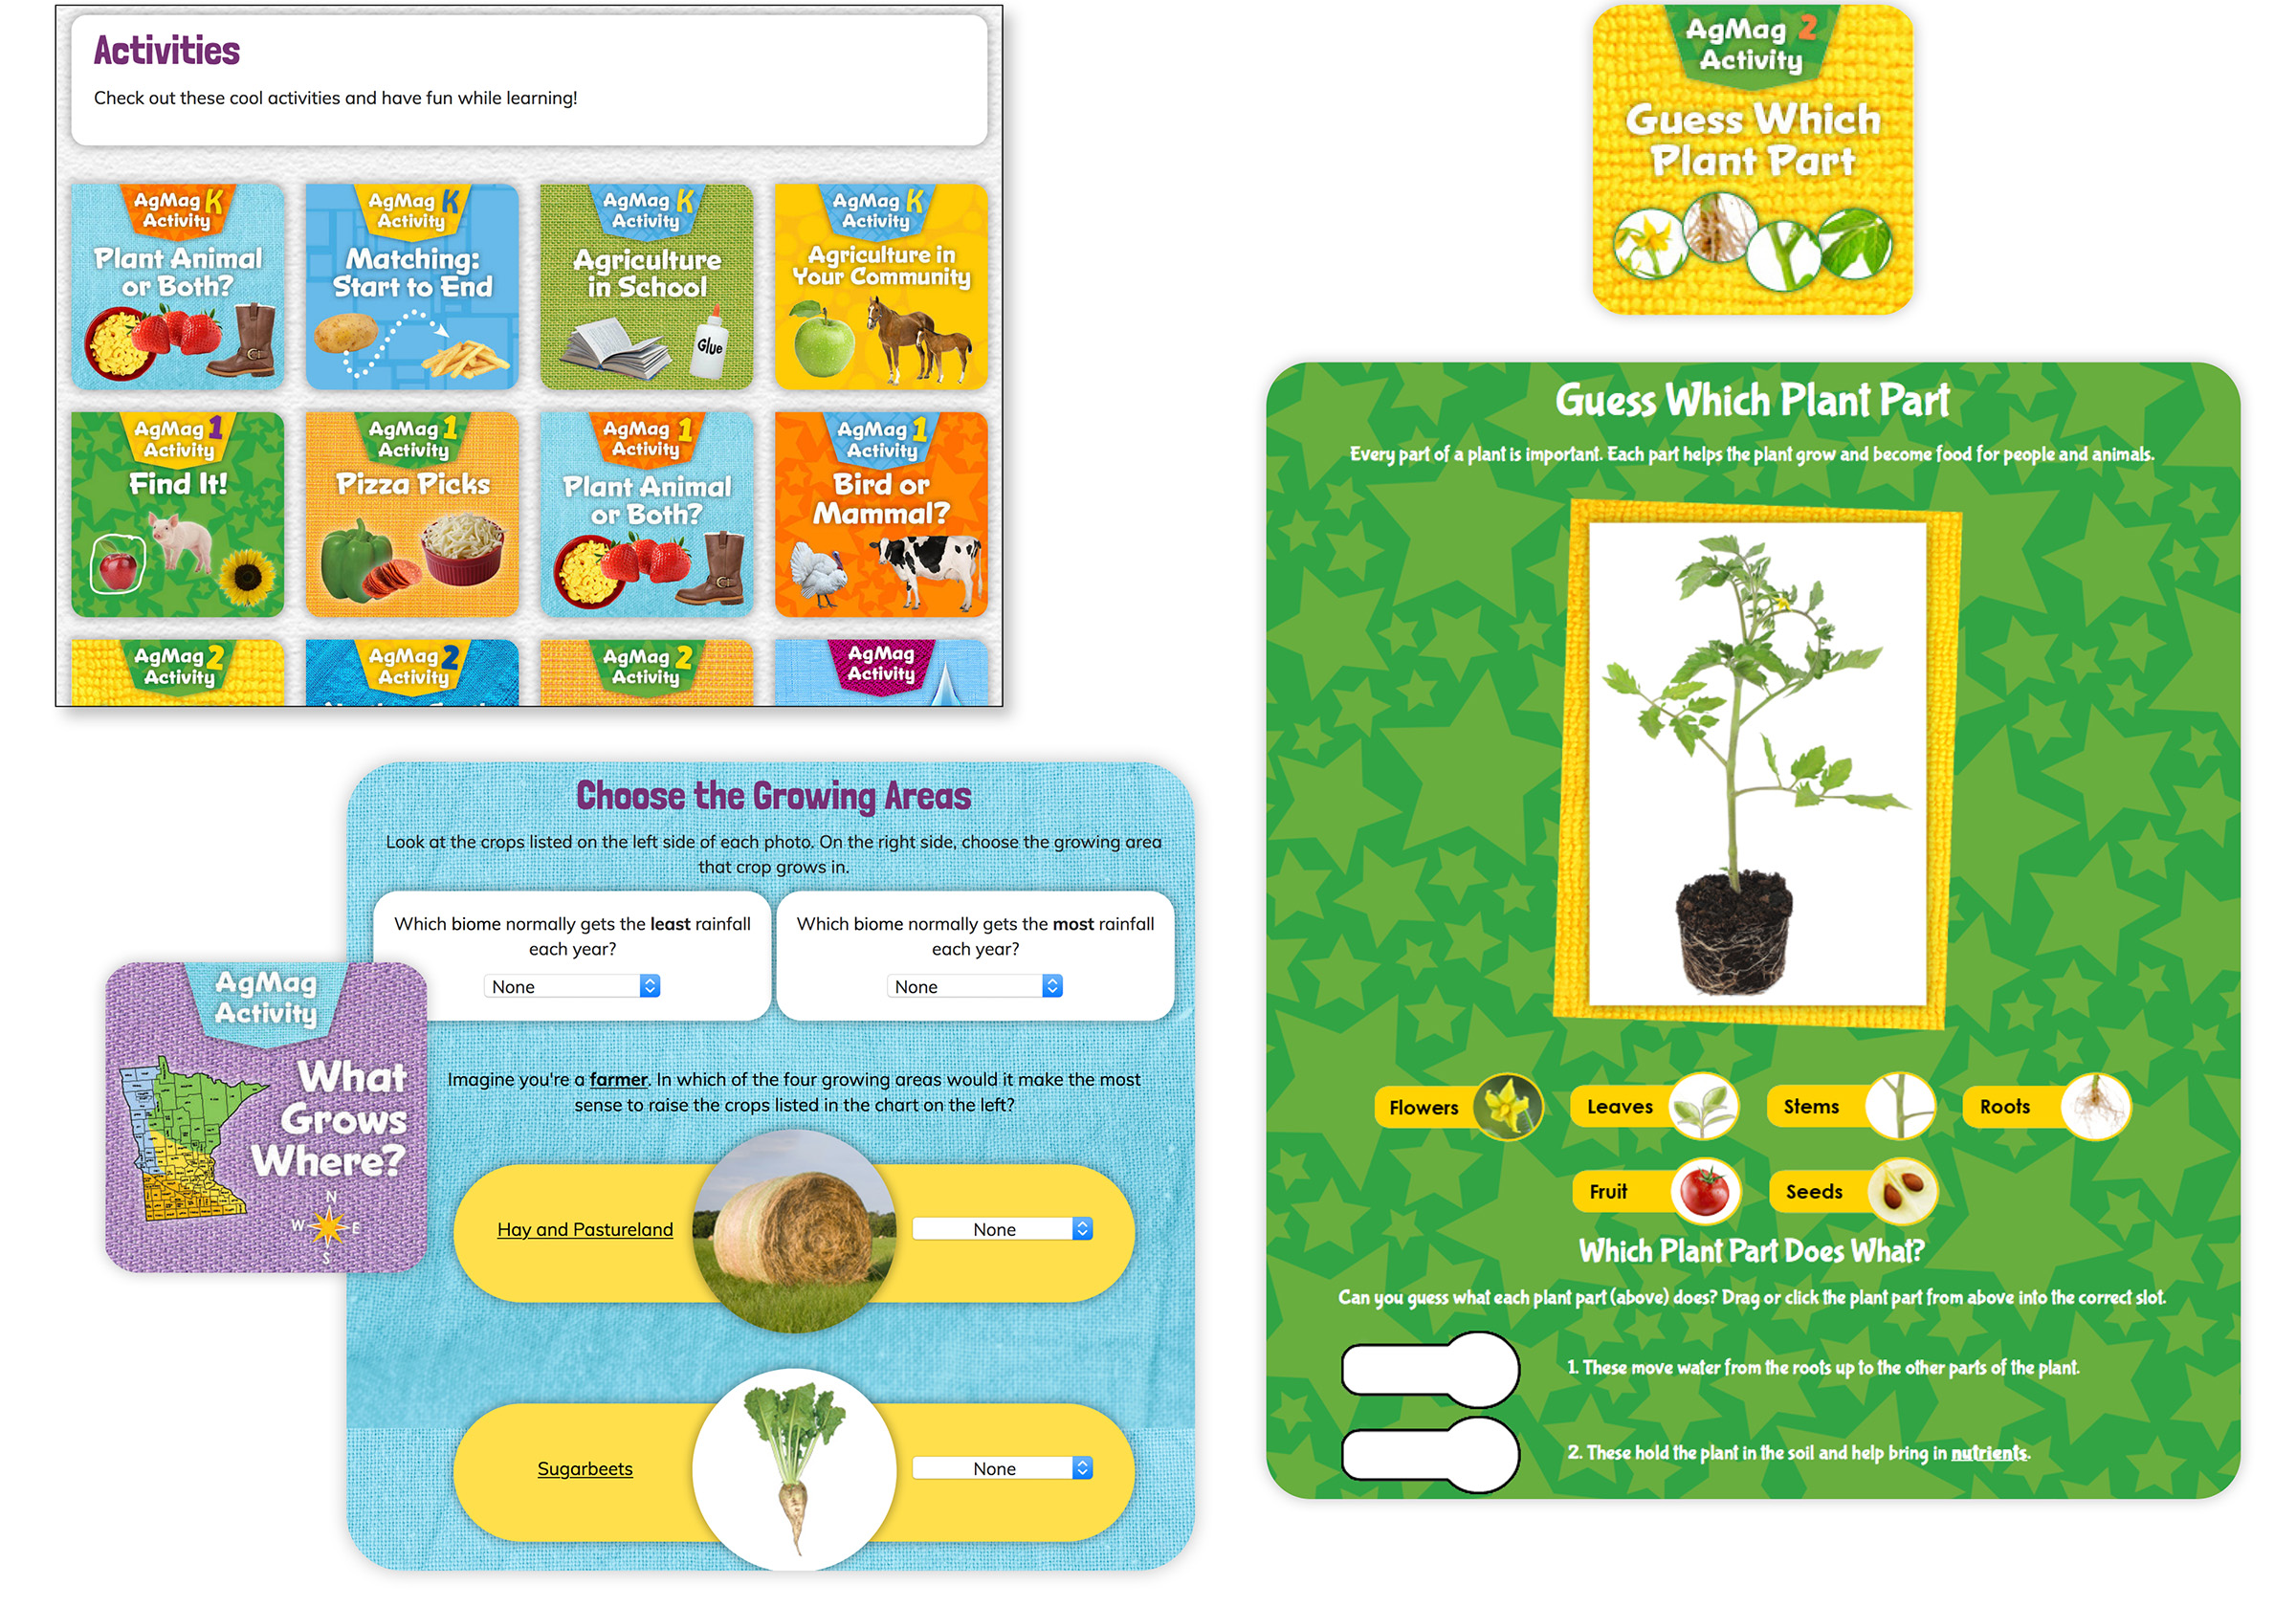 Image shows examples of interactive games kids can play to increase their retention of the lesson material. 